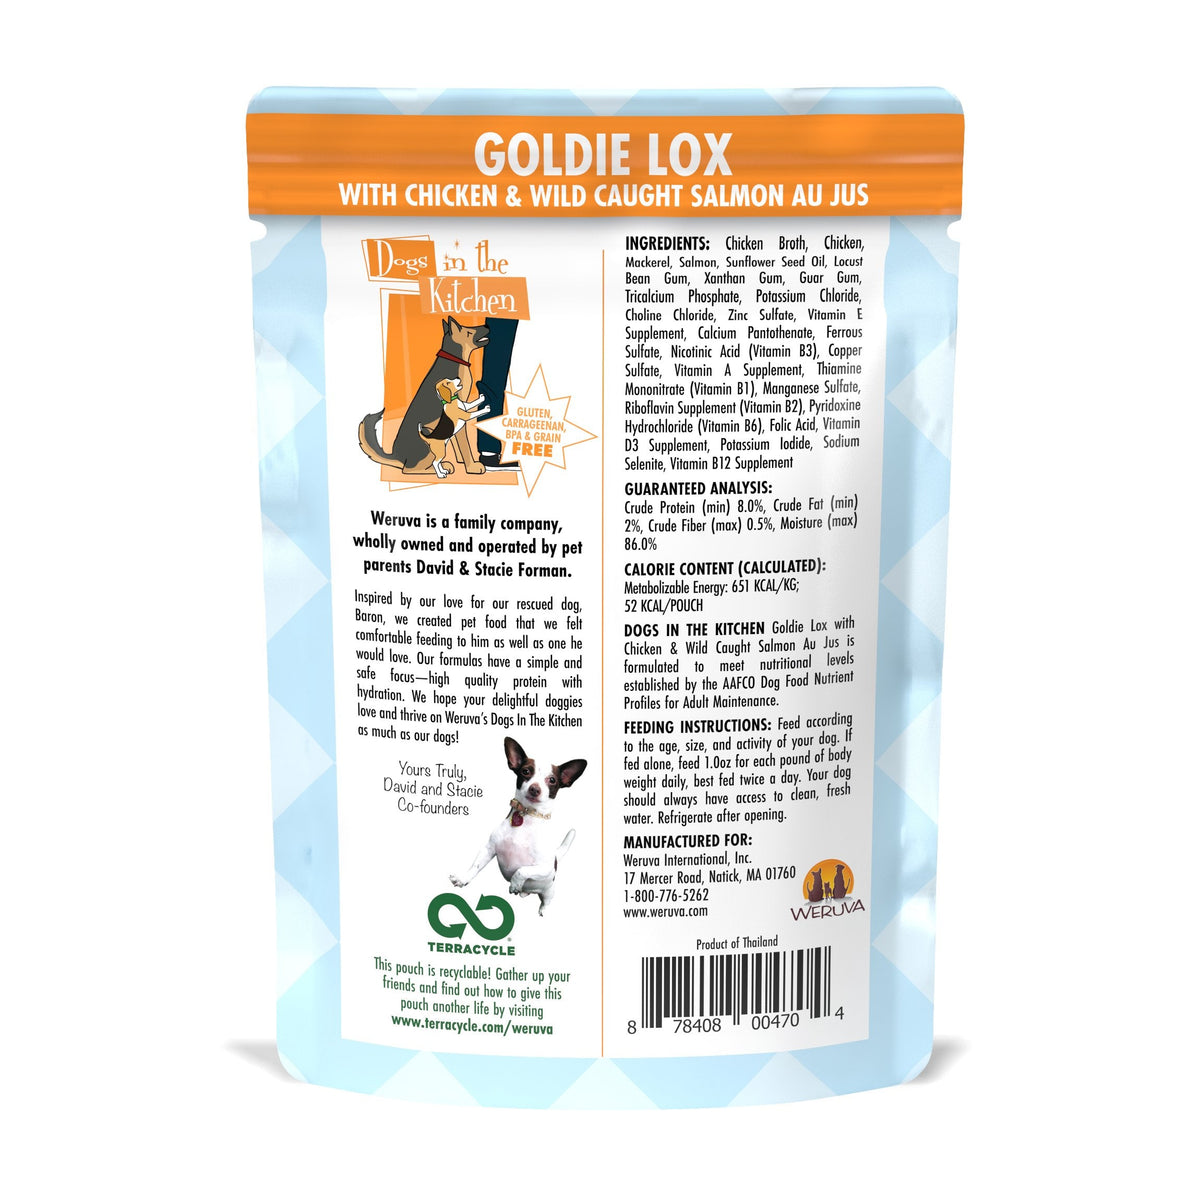 DOGS IN THE KITCHEN POUCH GOLDIE LOX 2.8oz-Four Muddy Paws